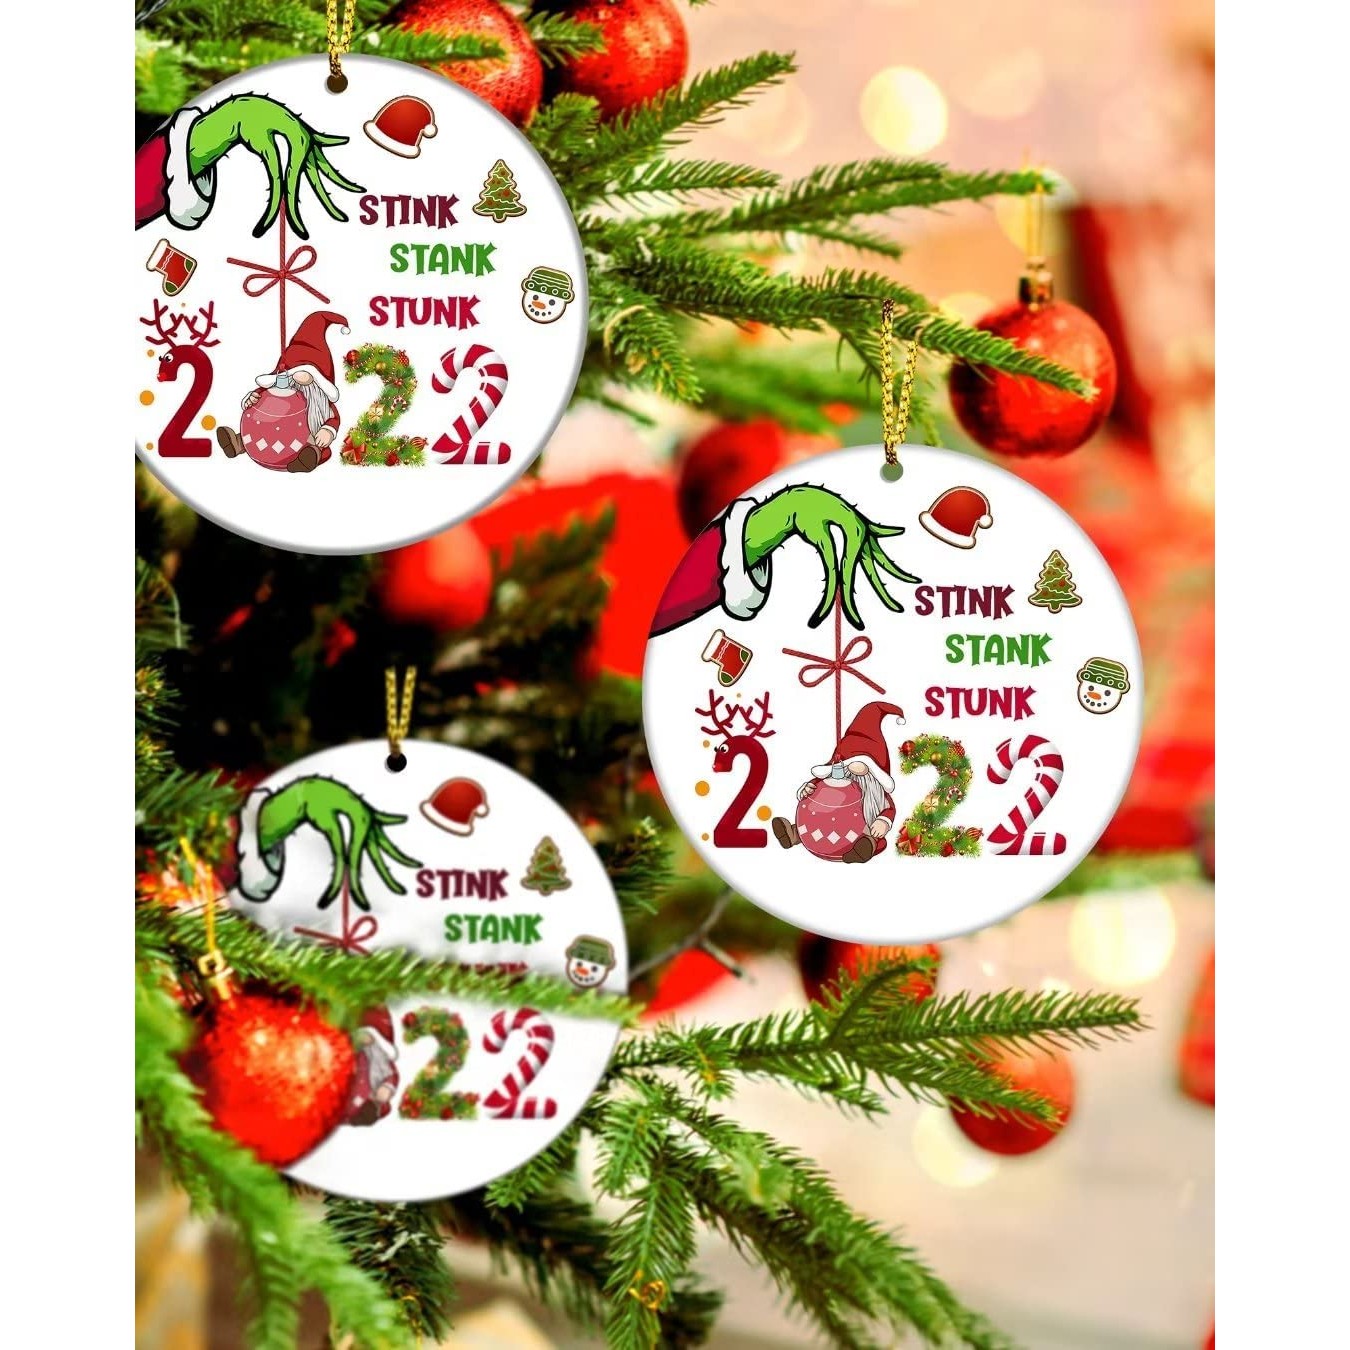 Three Grinchy Christmas tree ornaments which all say, 'Stink, stank, stunk 2022' on them.